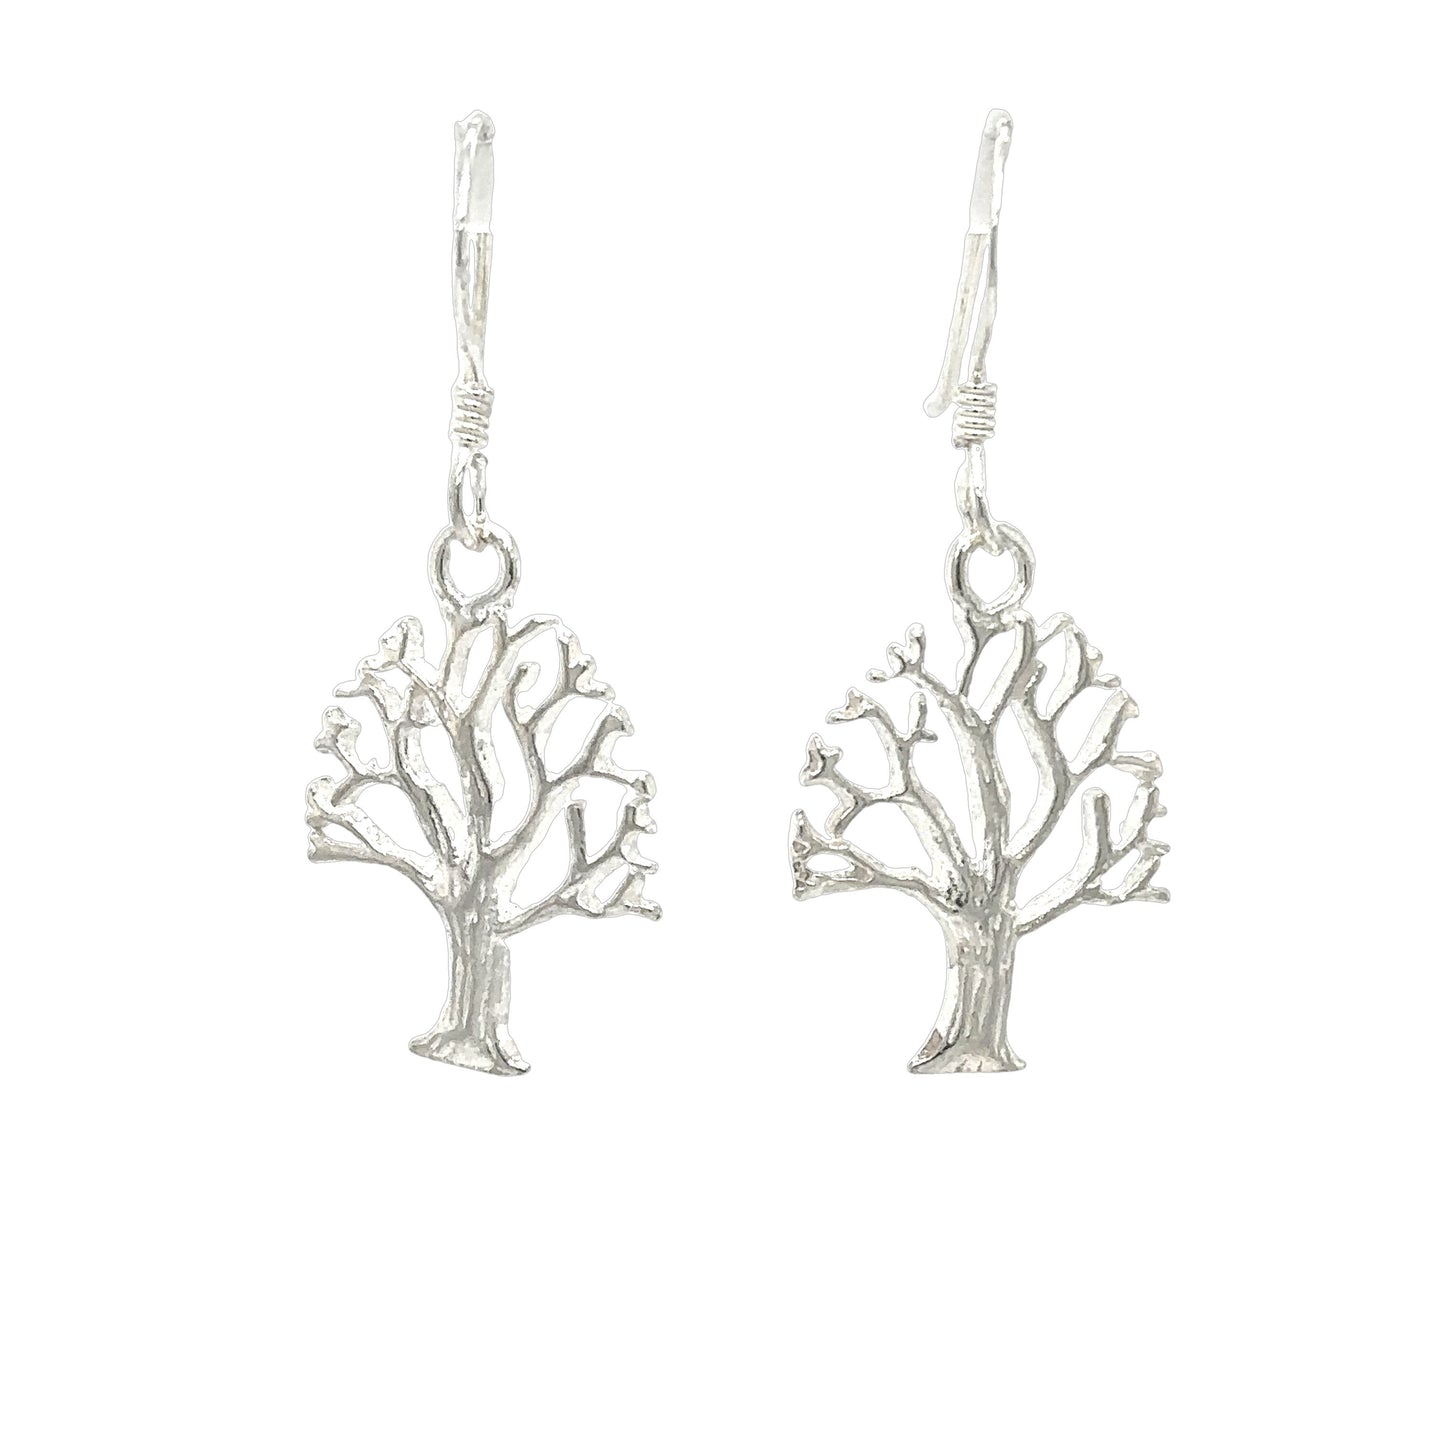 Super Silver's Tree Of Life Earrings on a white background.